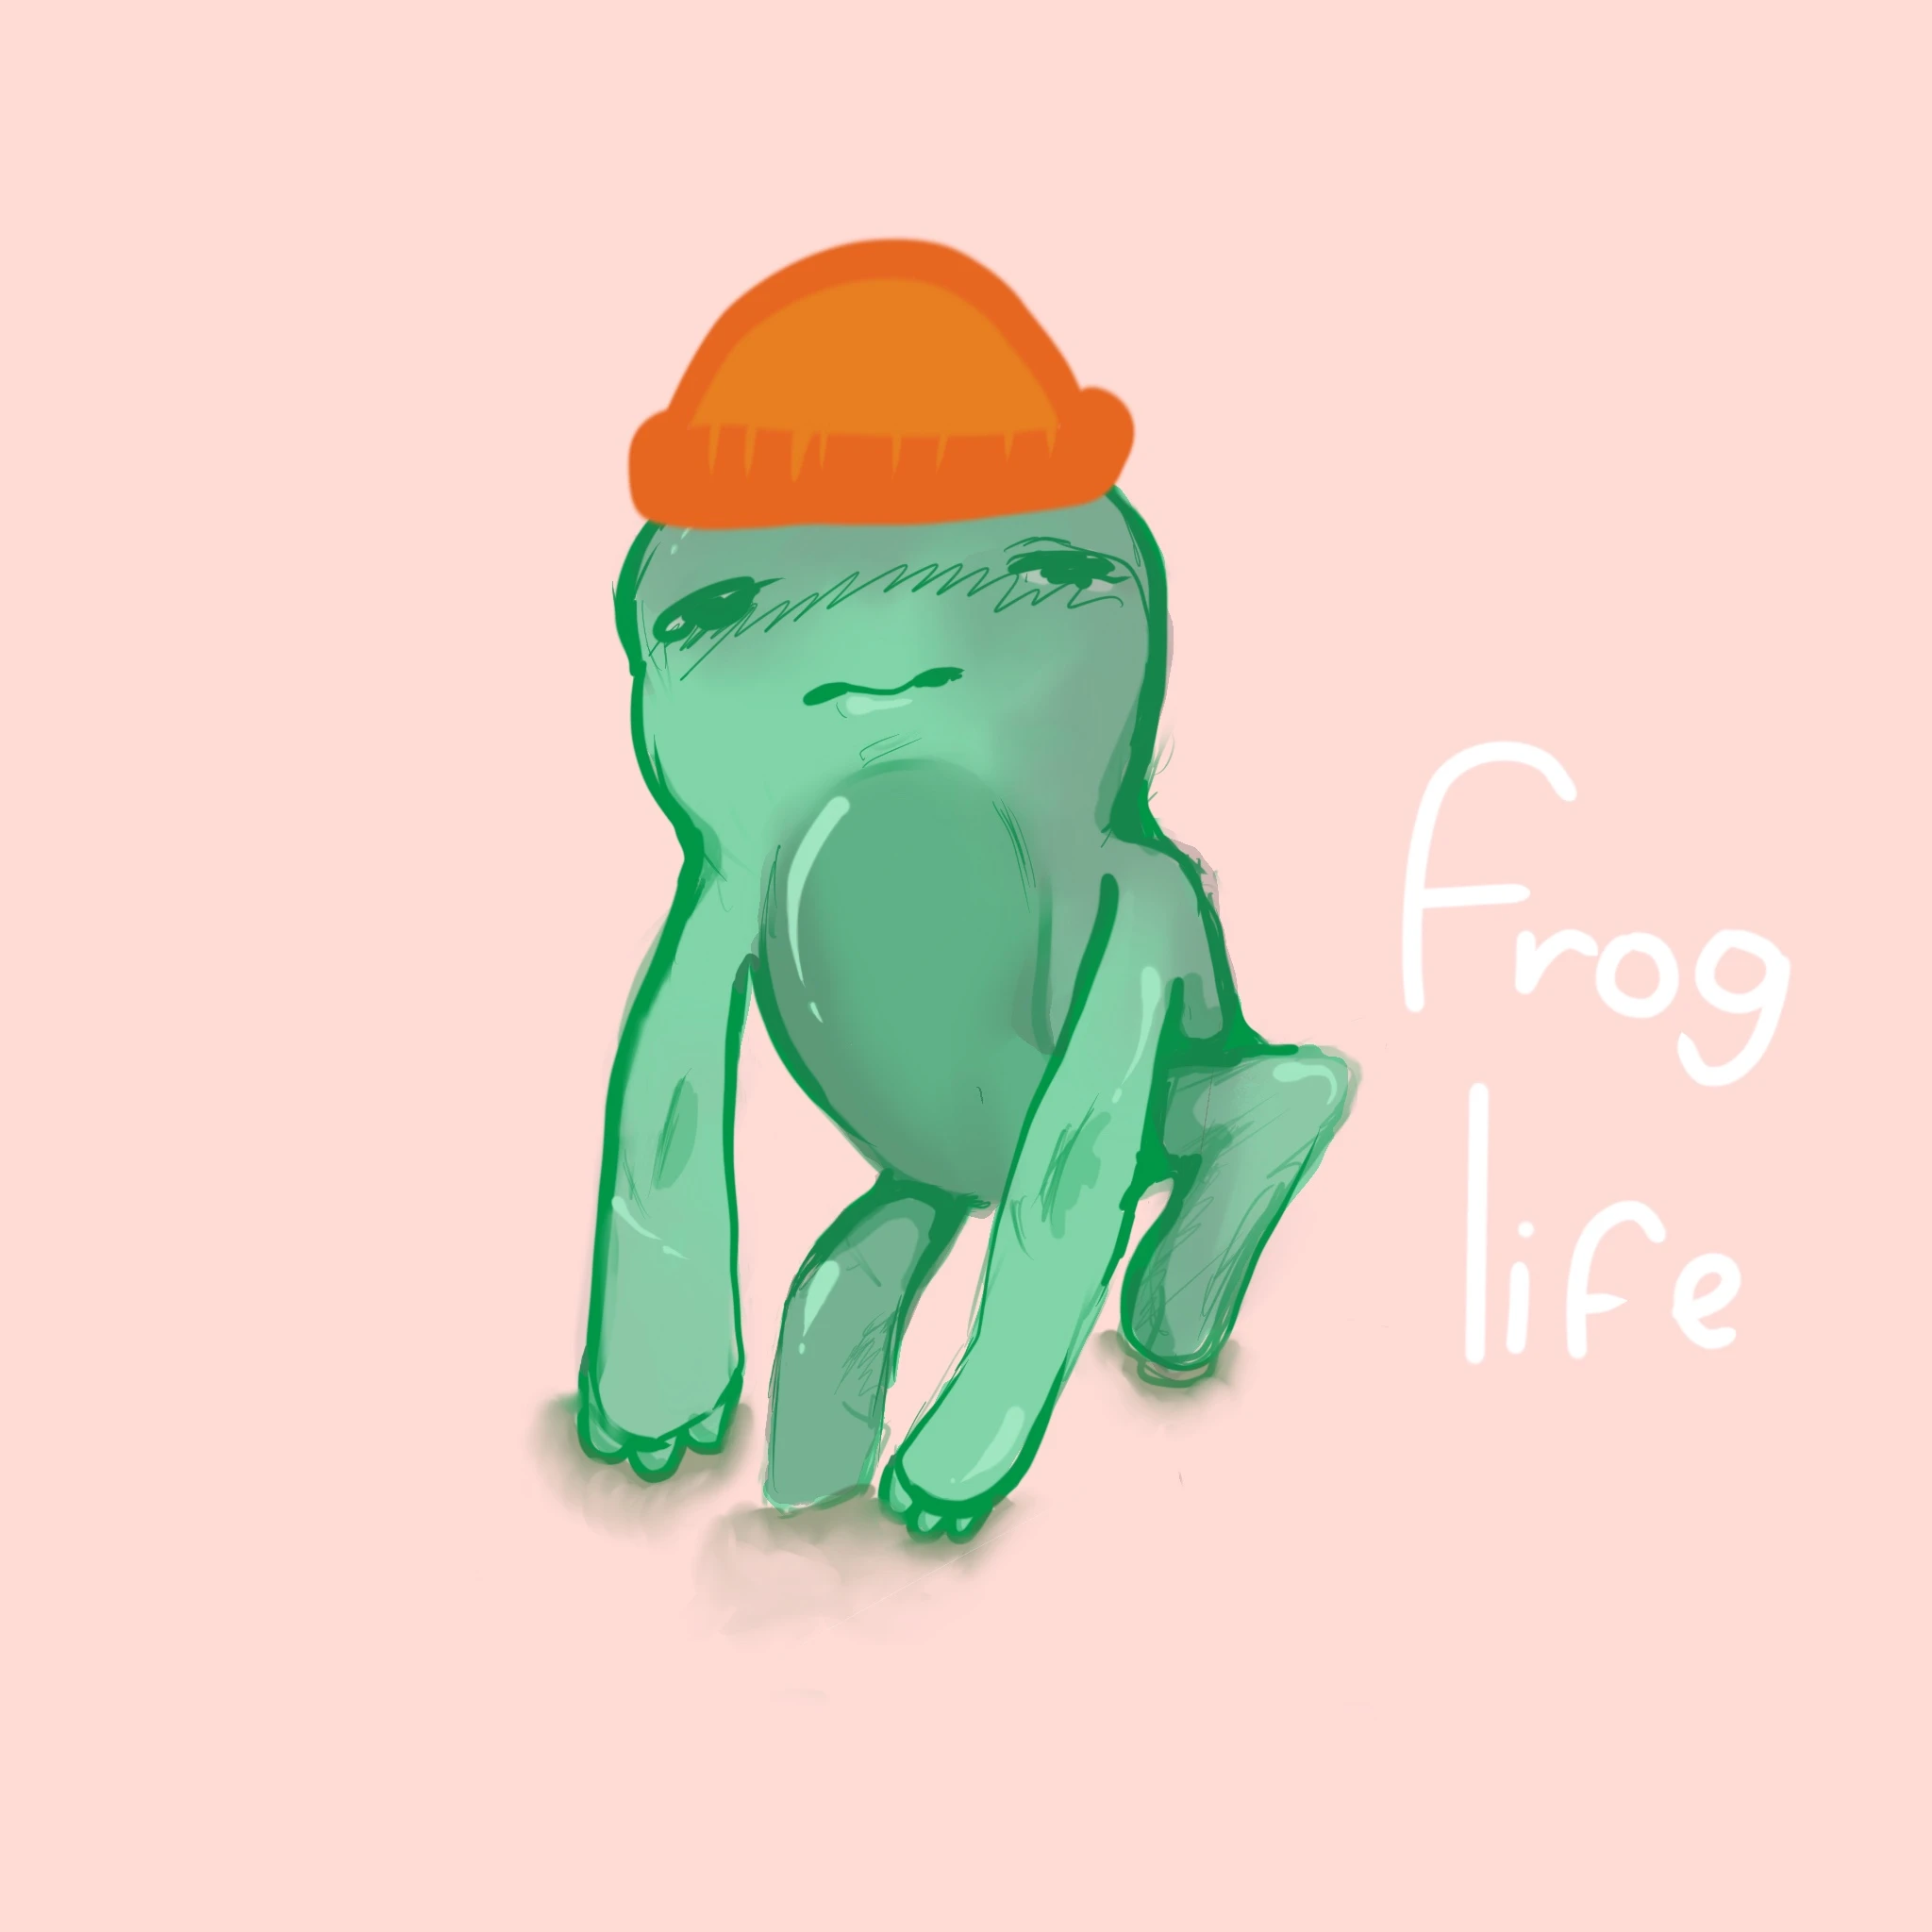 Frog Life by Sophia Ting